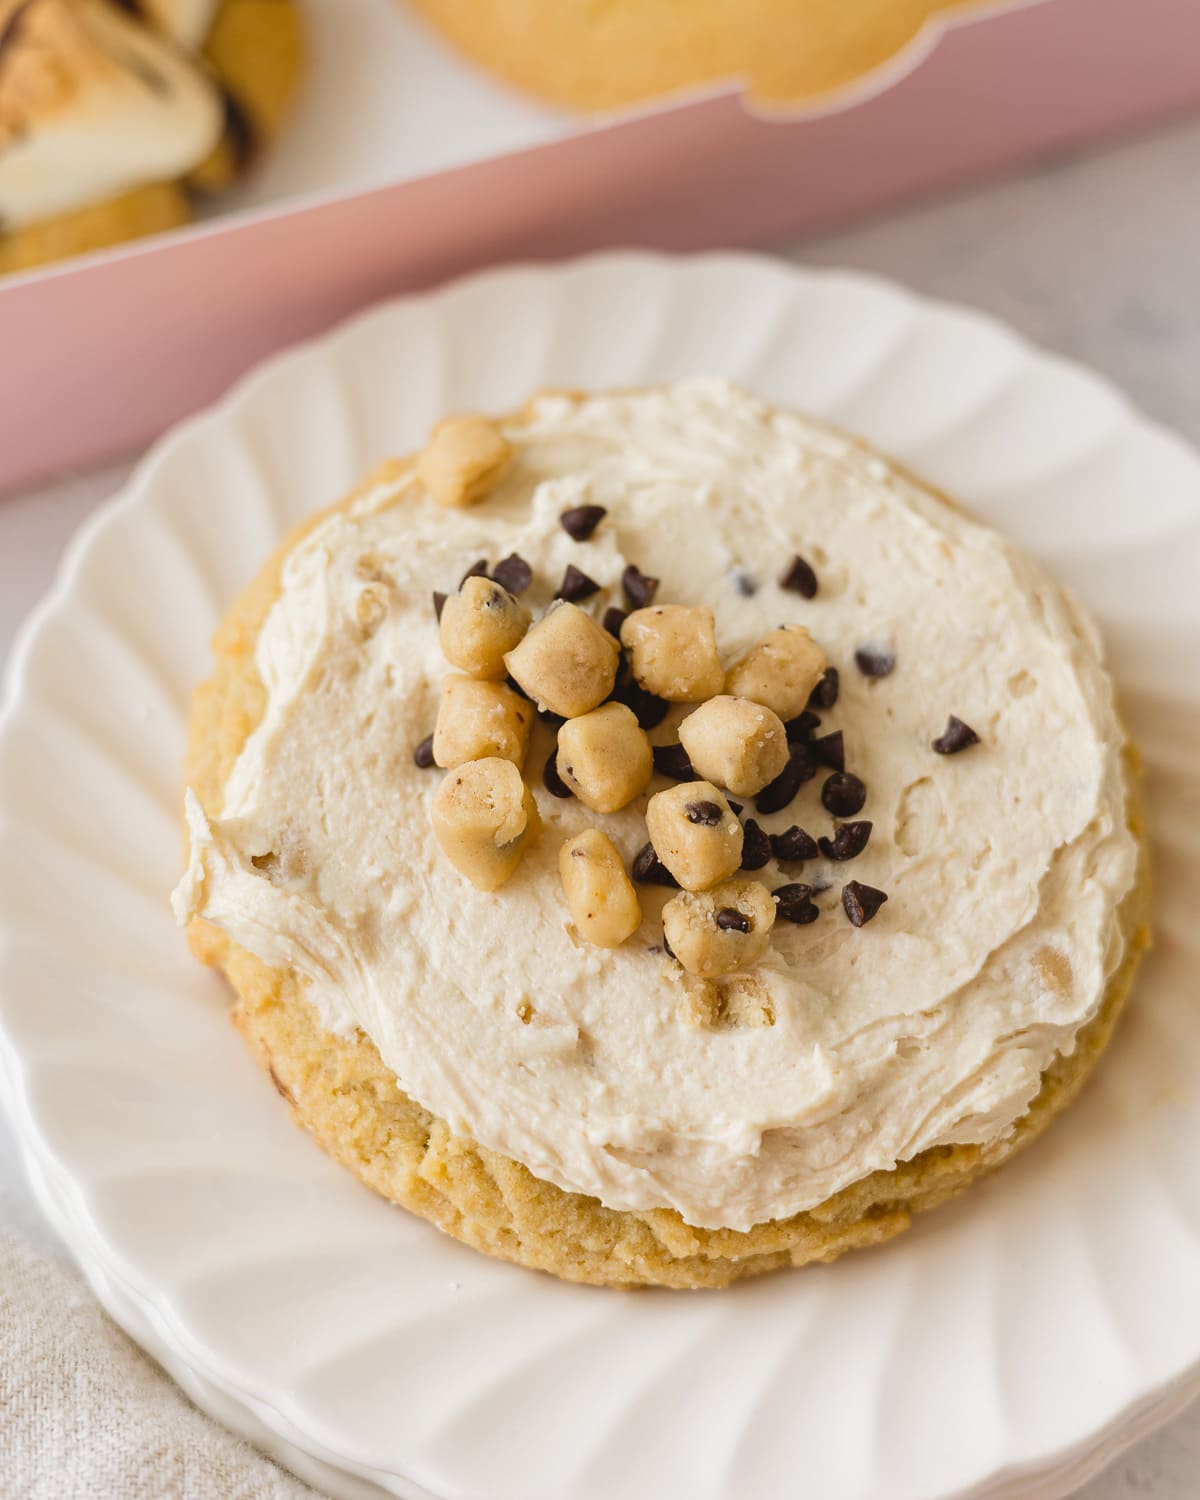 A Chocolate Chip Cookie Dough Crumbl Cookie on a small stack of white plates.